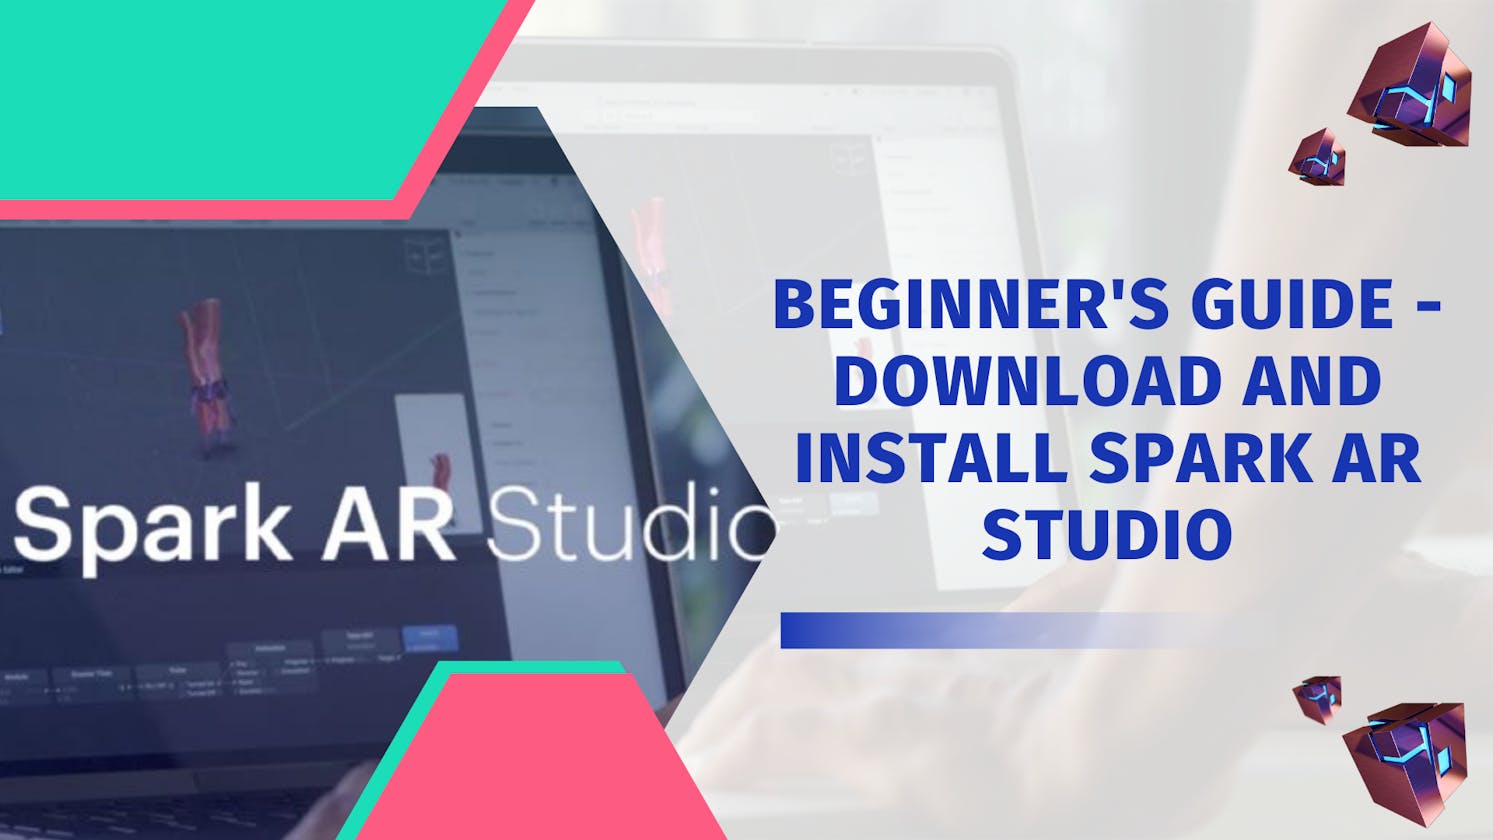 Beginner's Guide - Download and Install Spark AR Studio